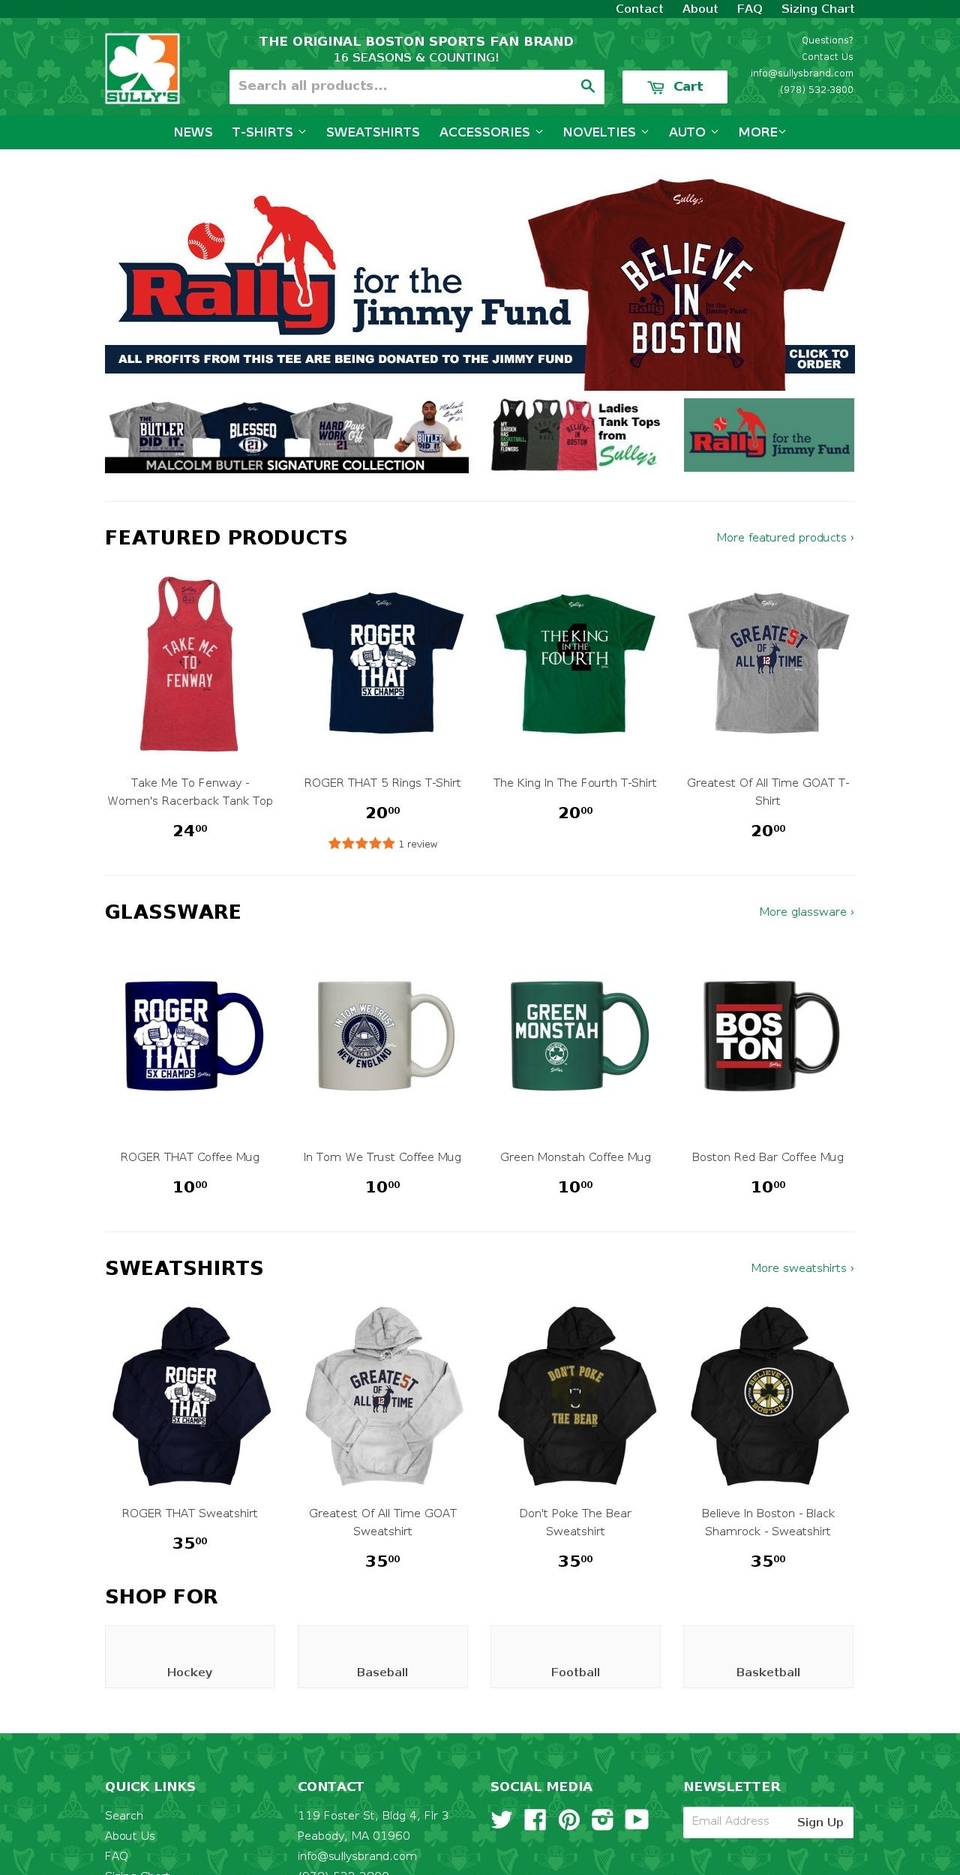 Sully's Brand Shopify theme site example yankee-hater.net